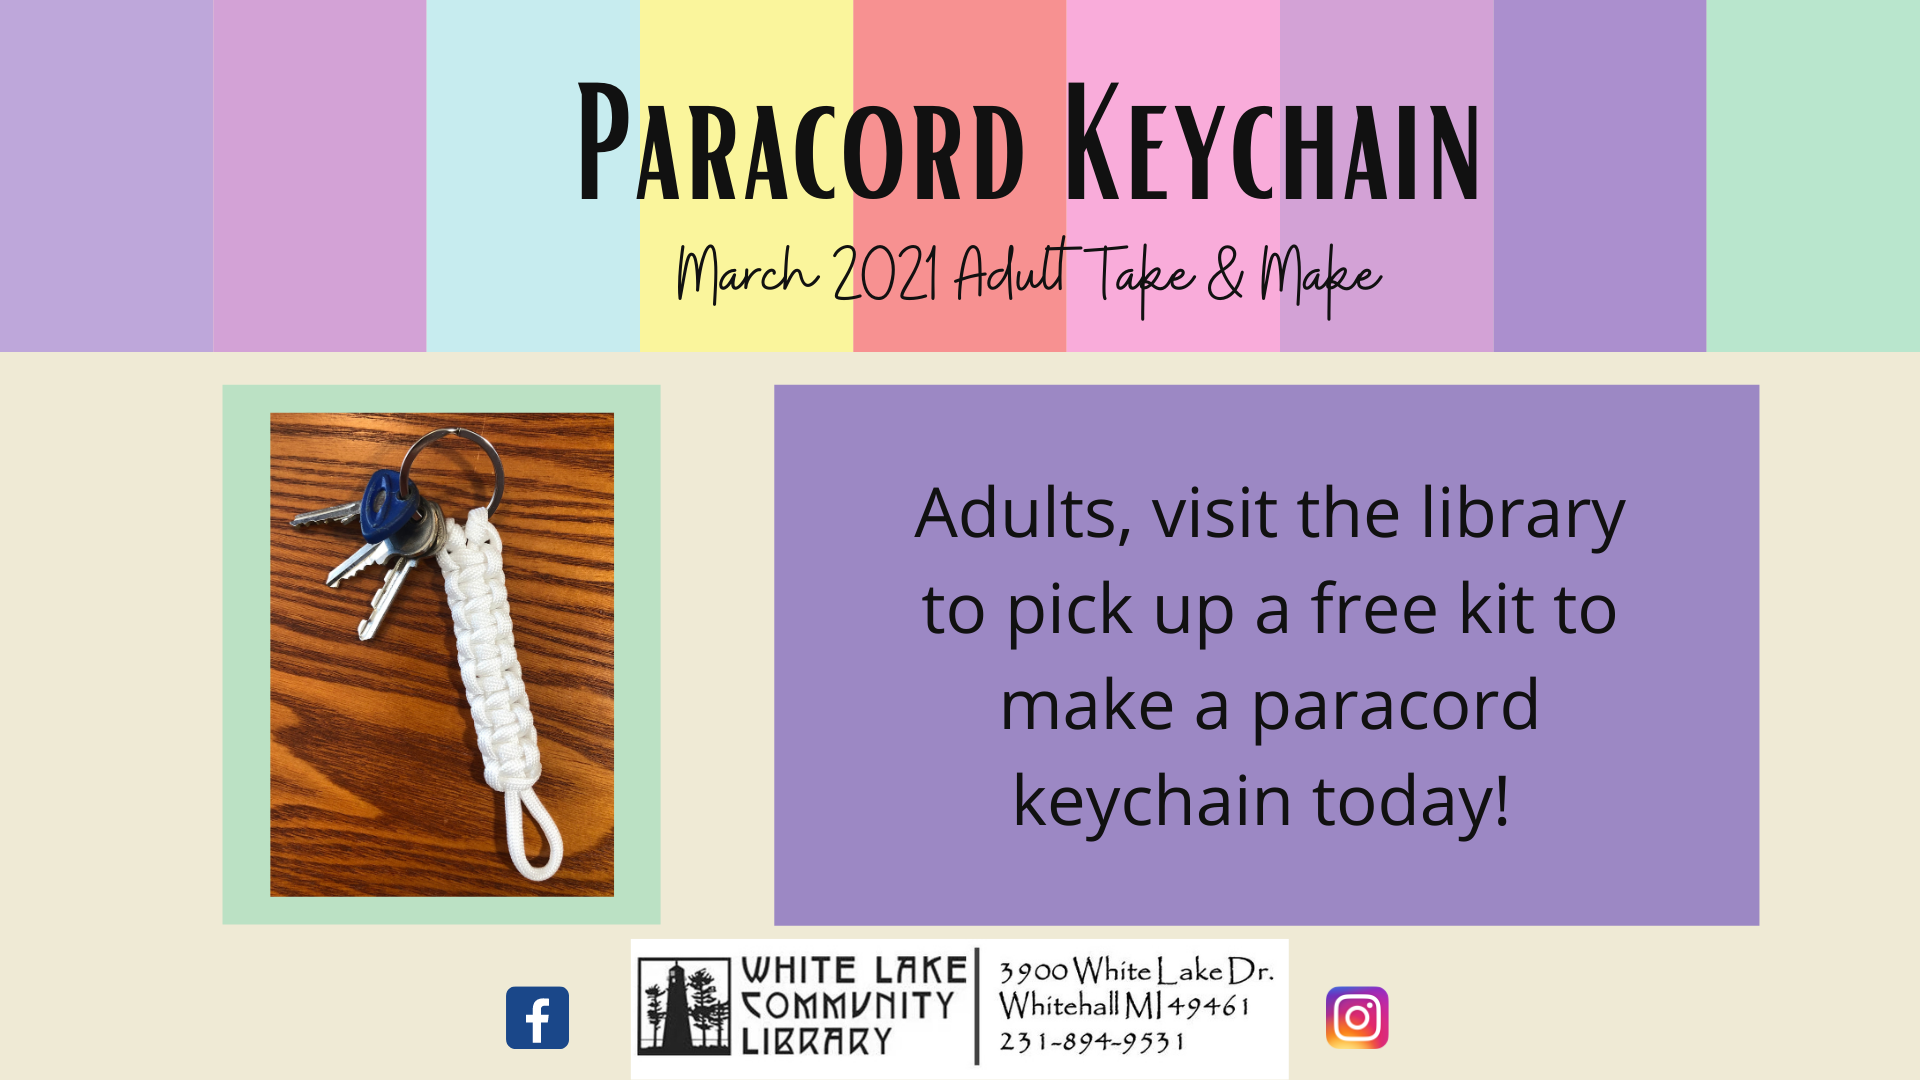 Paracord Keychain March 21